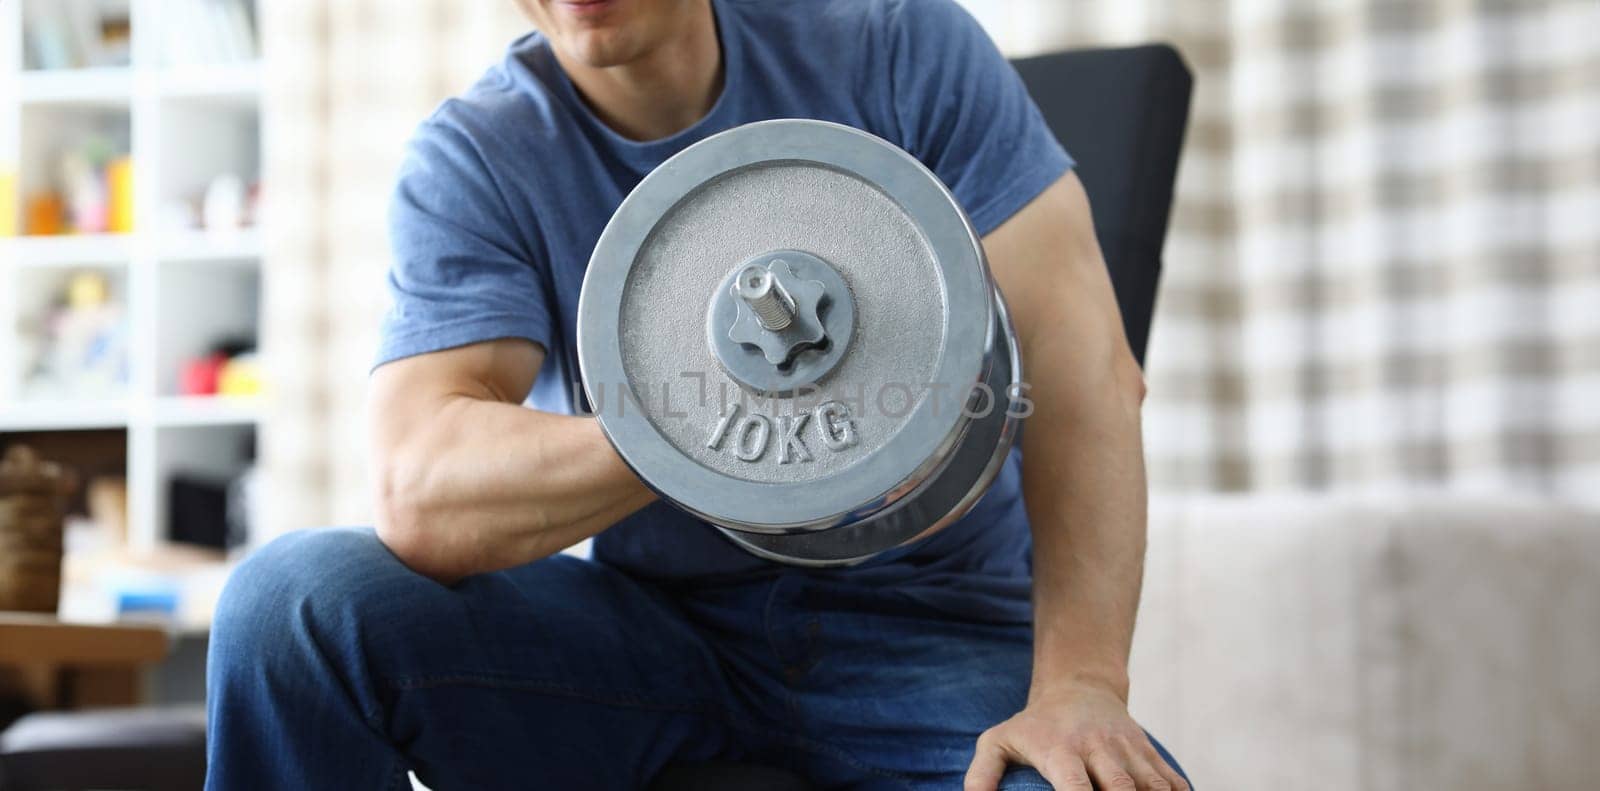 Man lifts heavy dumbbell while sitting on sofa by kuprevich